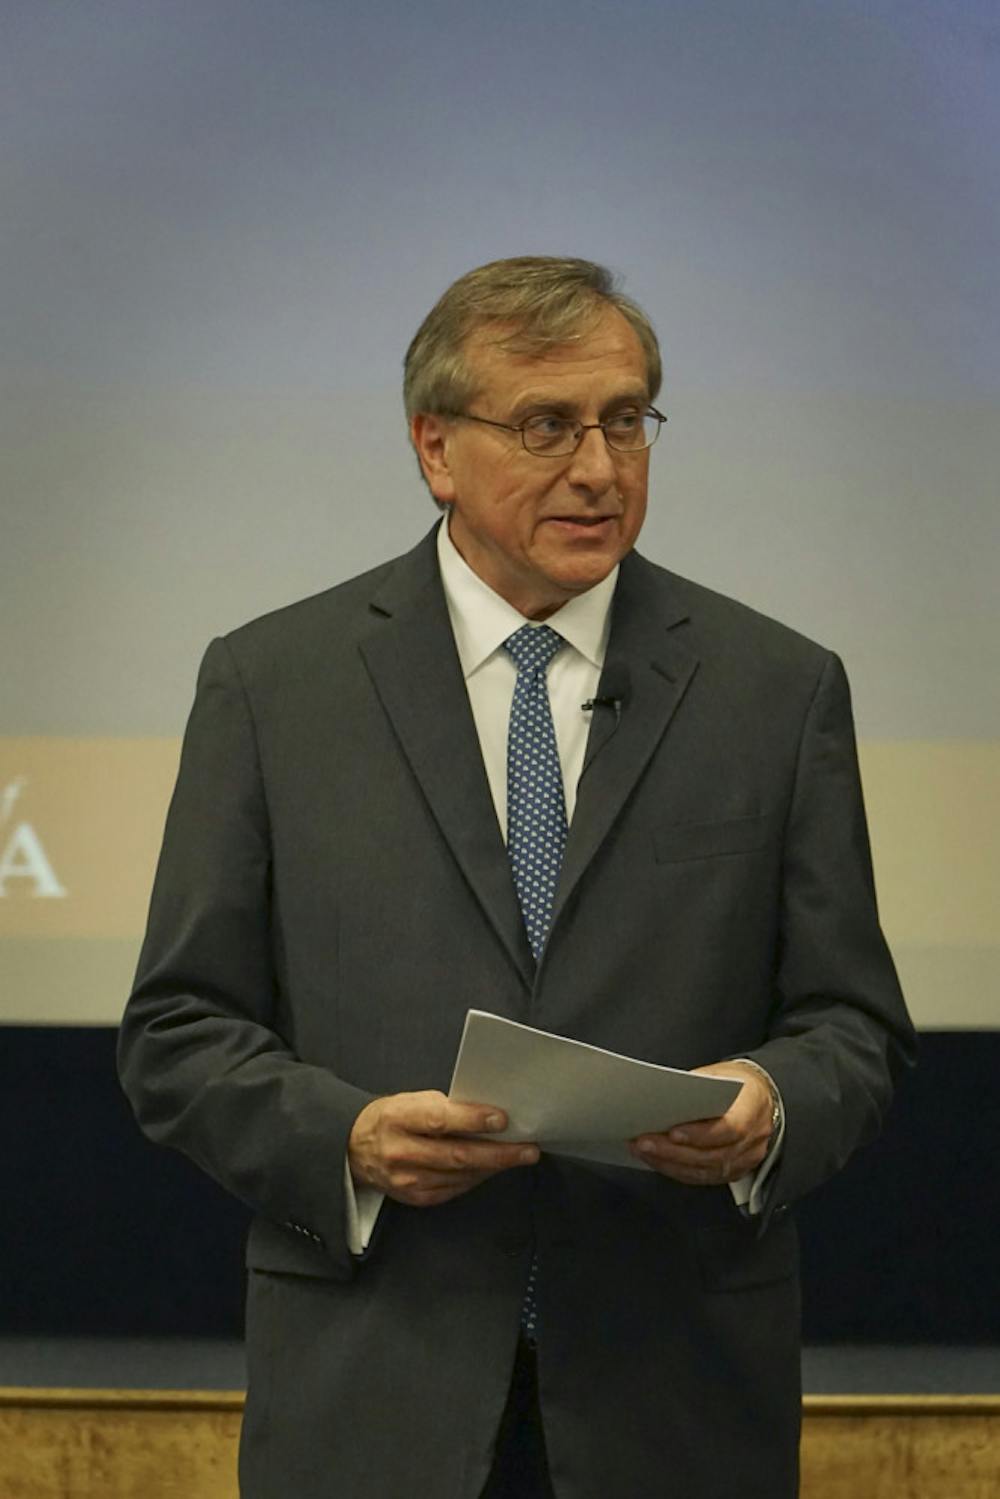 <p>UF President Kent Fuchs delivers his State of the University address in the Reitz Union Auditorium on Sept. 24, 2015. He plans to increase diversity and research opportunities at UF.</p>